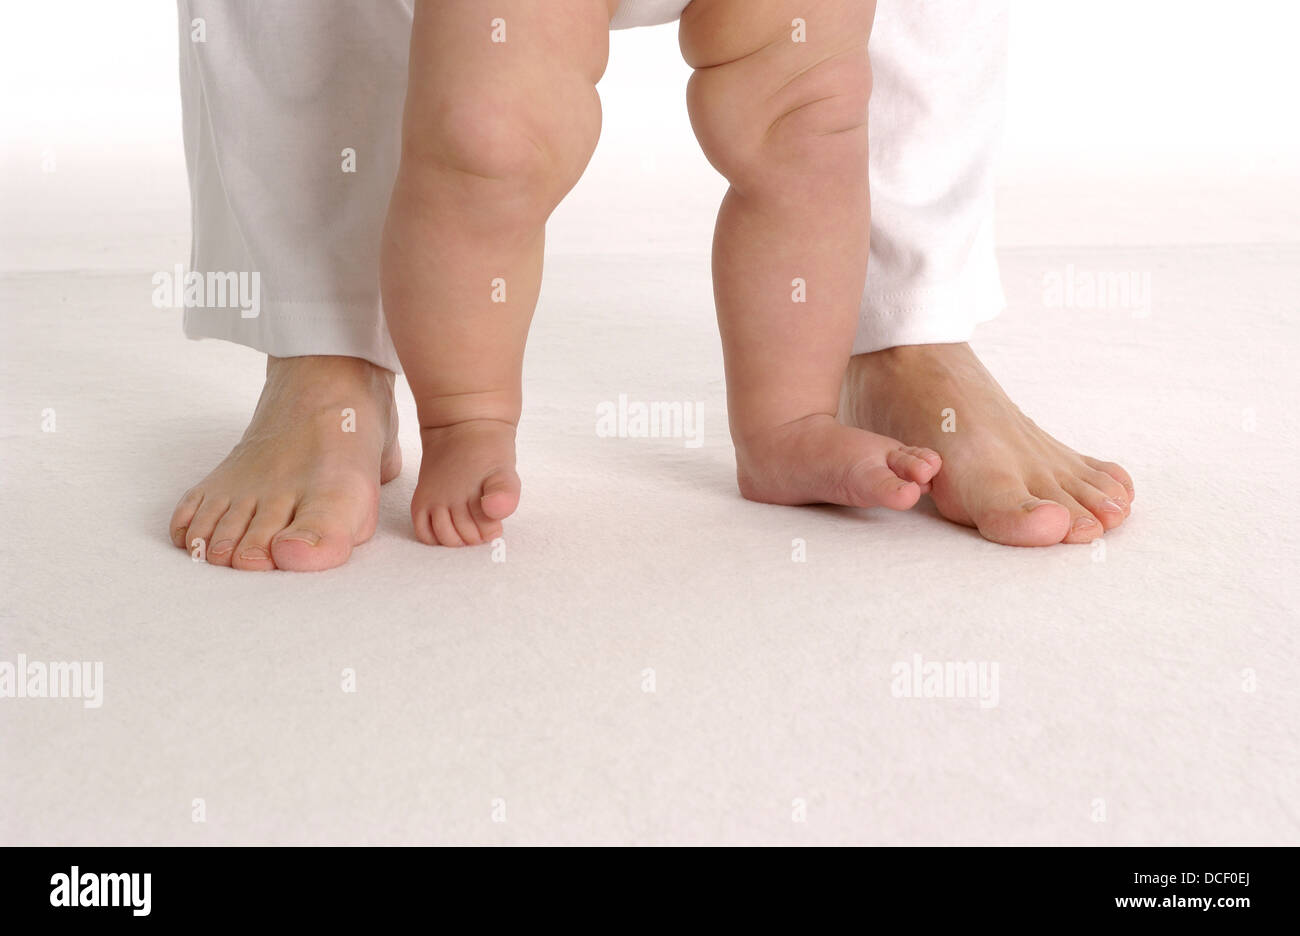 Large and small feet Stock Photo